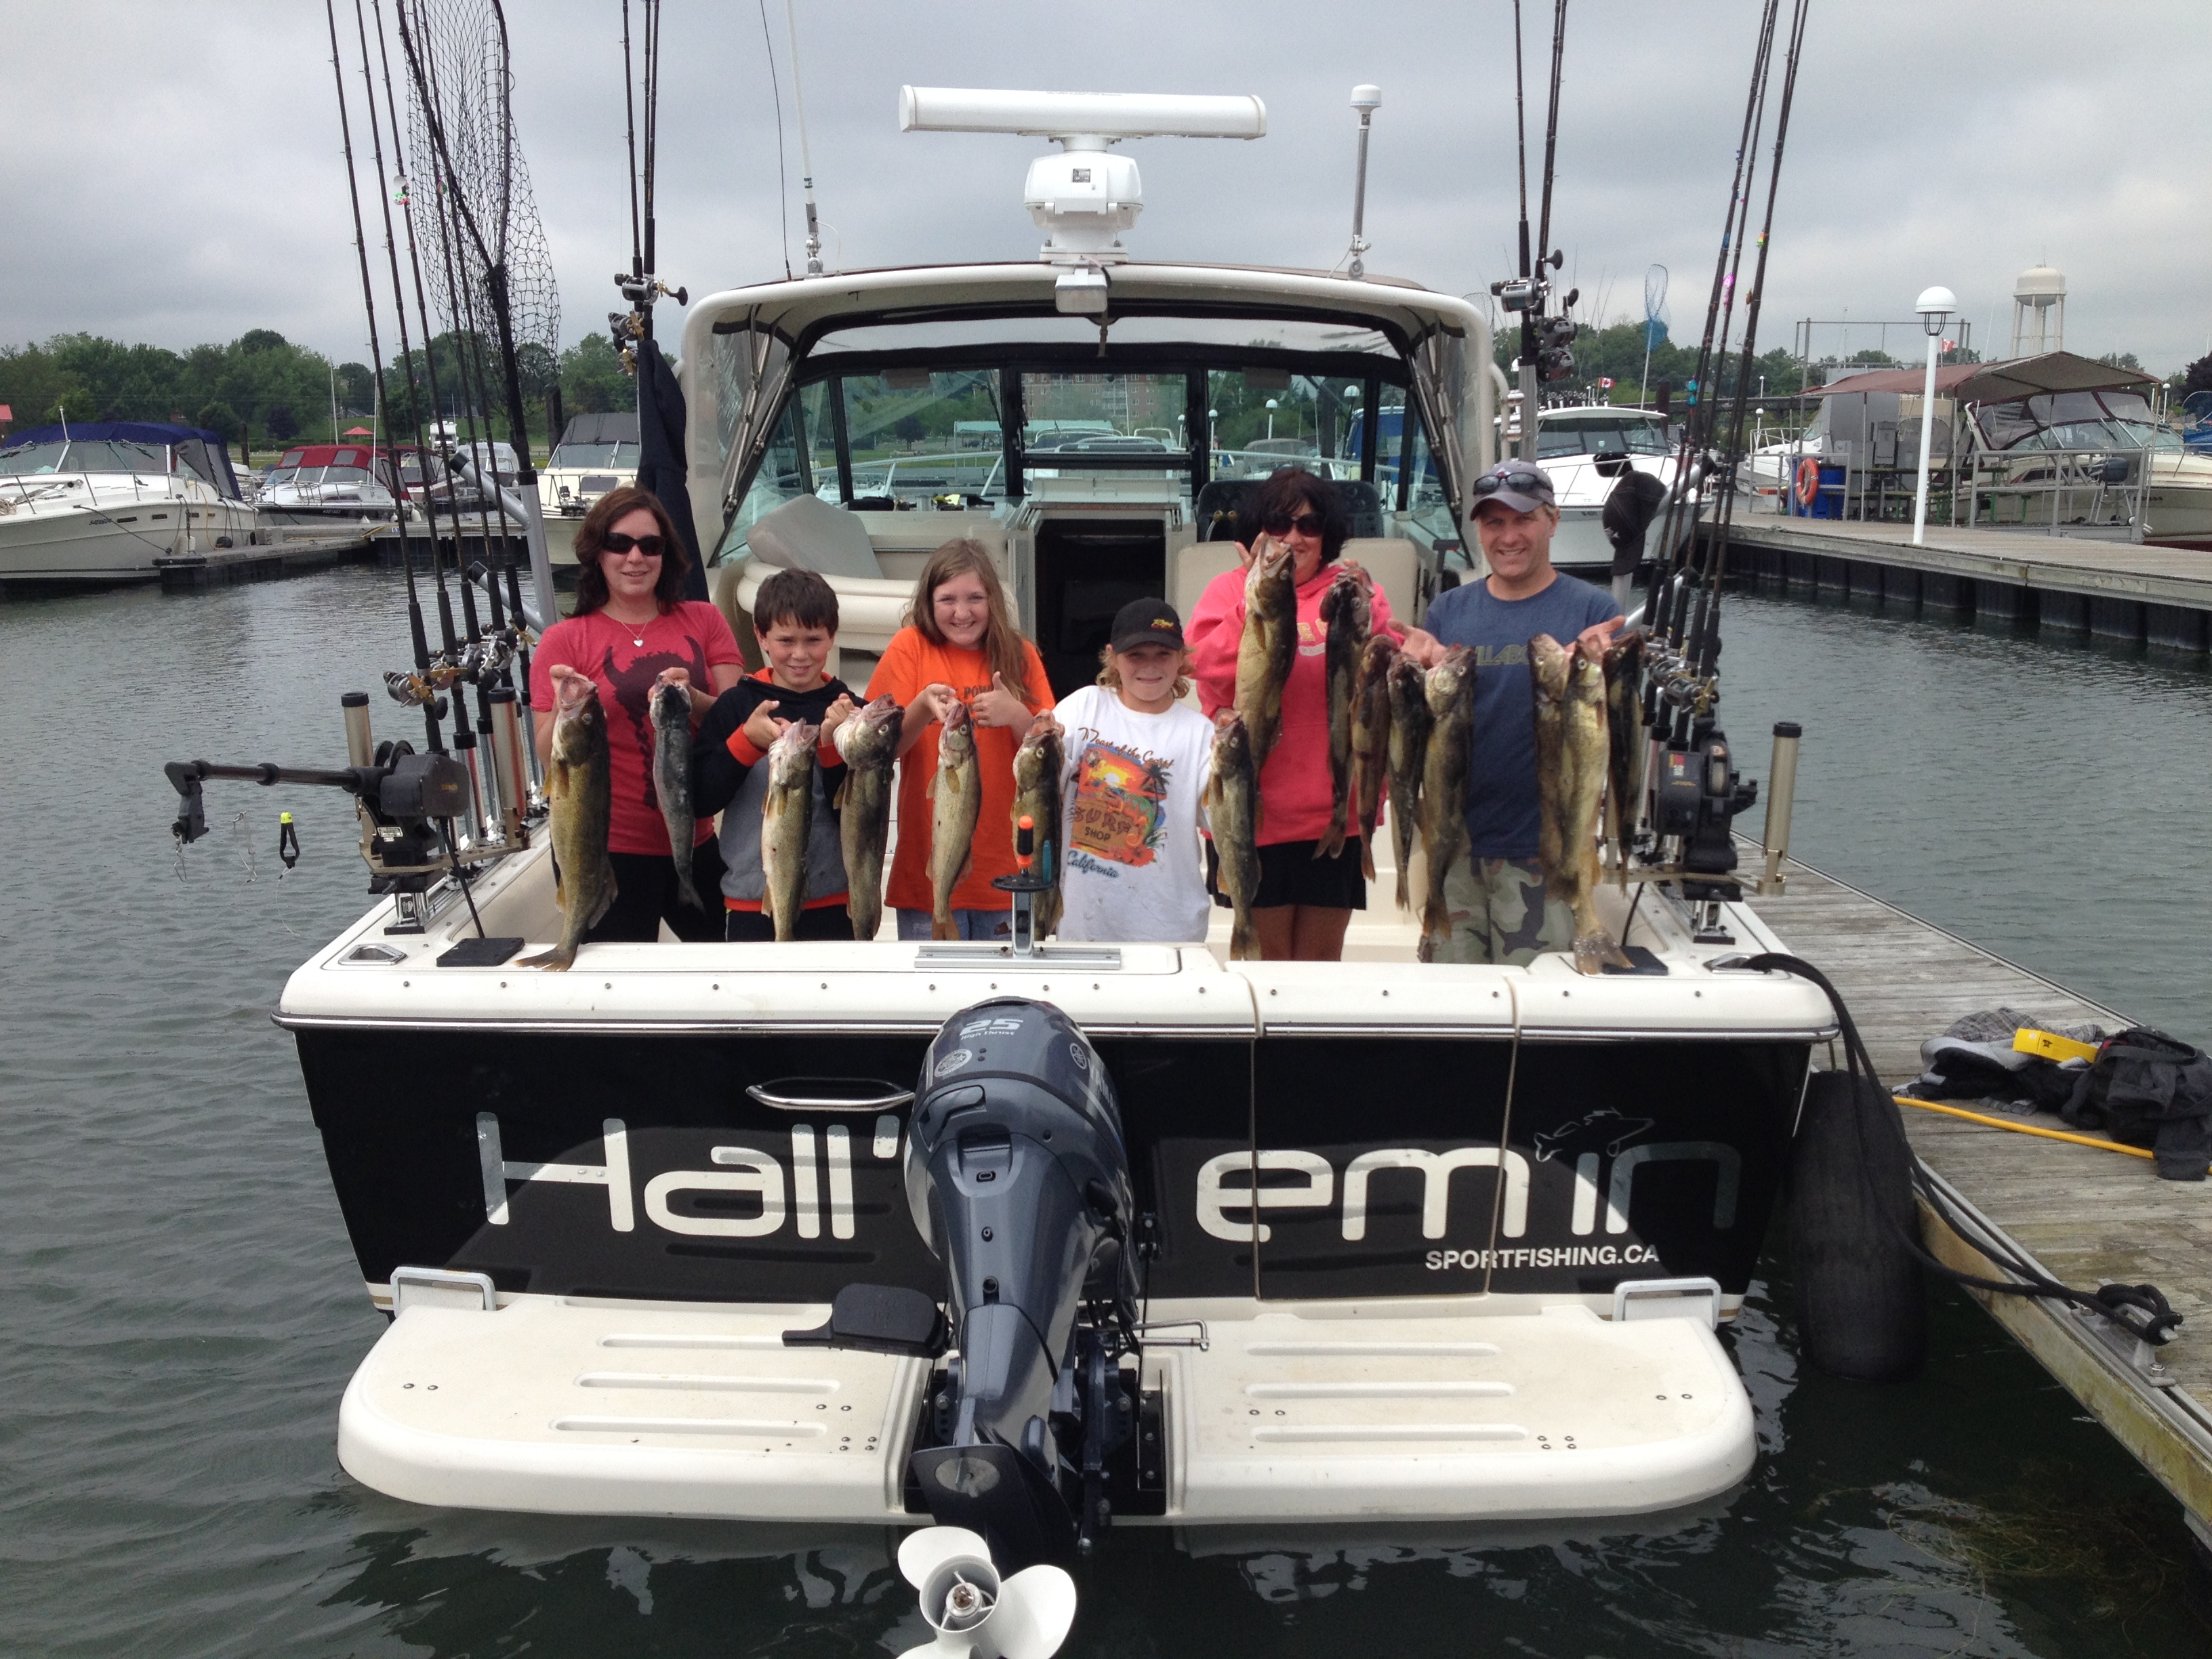 Our Boats – Hall'emin Sport Fishing